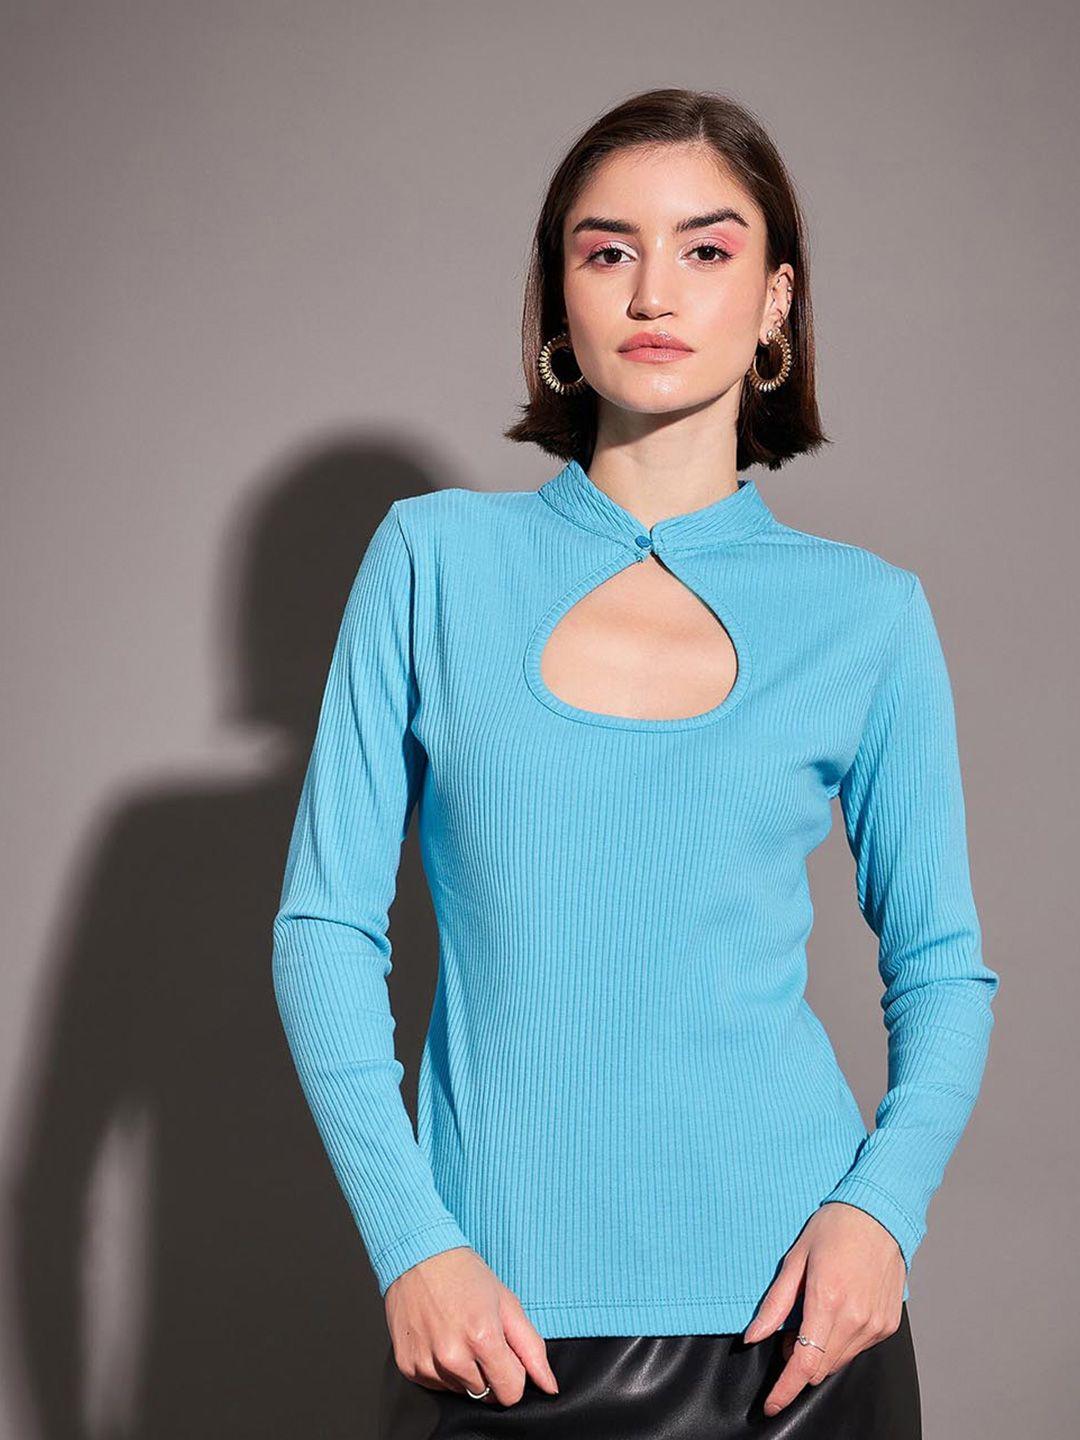 sassafras-turquoise-blue-keyhole-neck-fitted-top